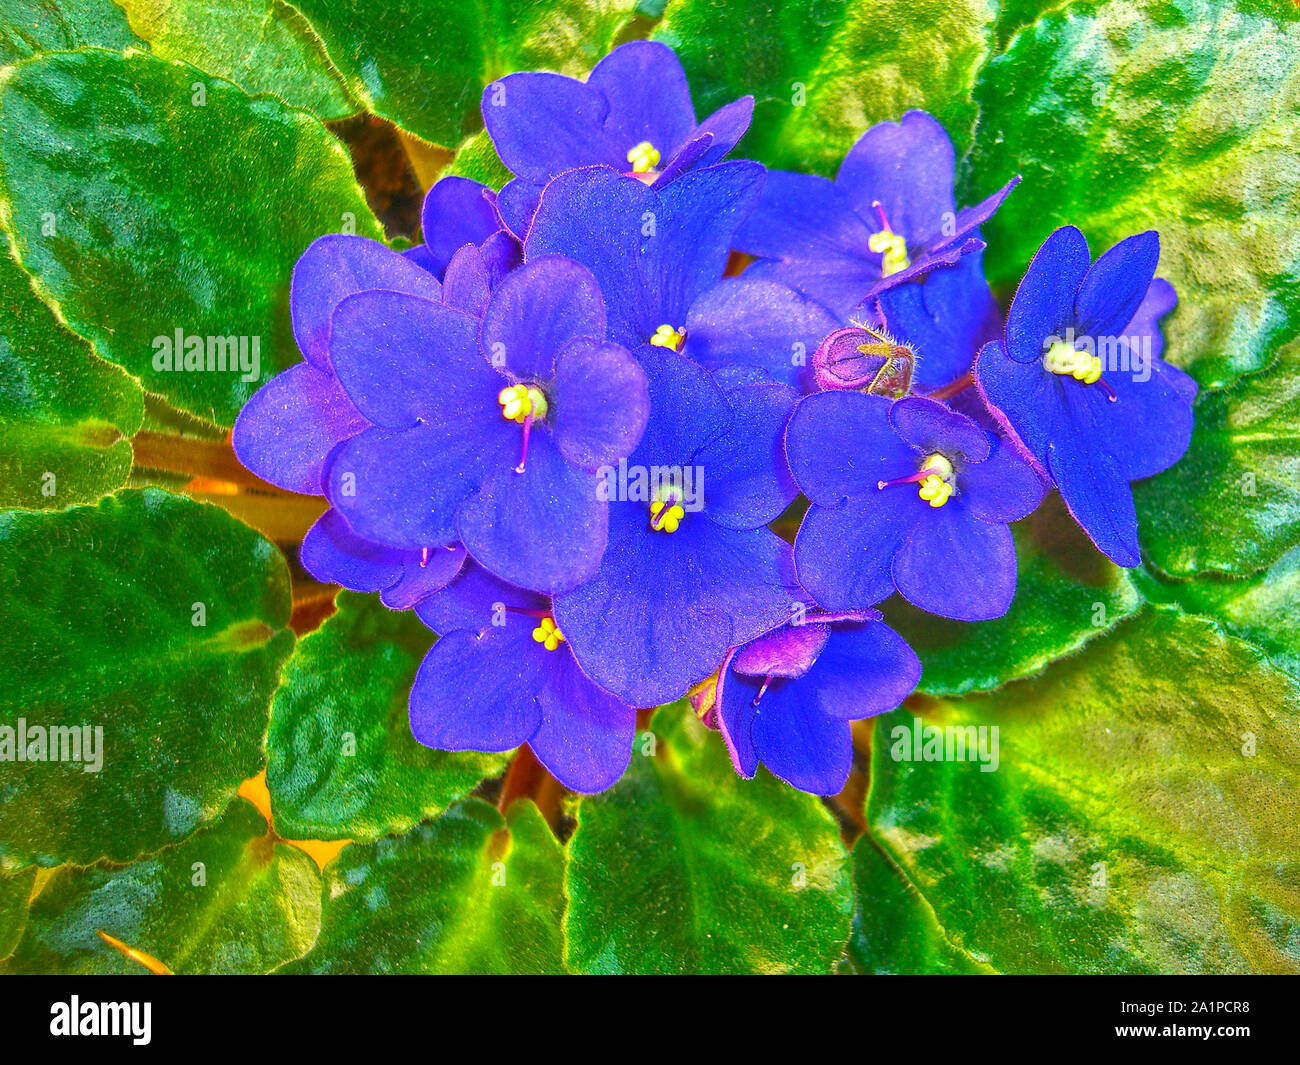 Purple beautiful pansy flowers on green leaves Stock Photo